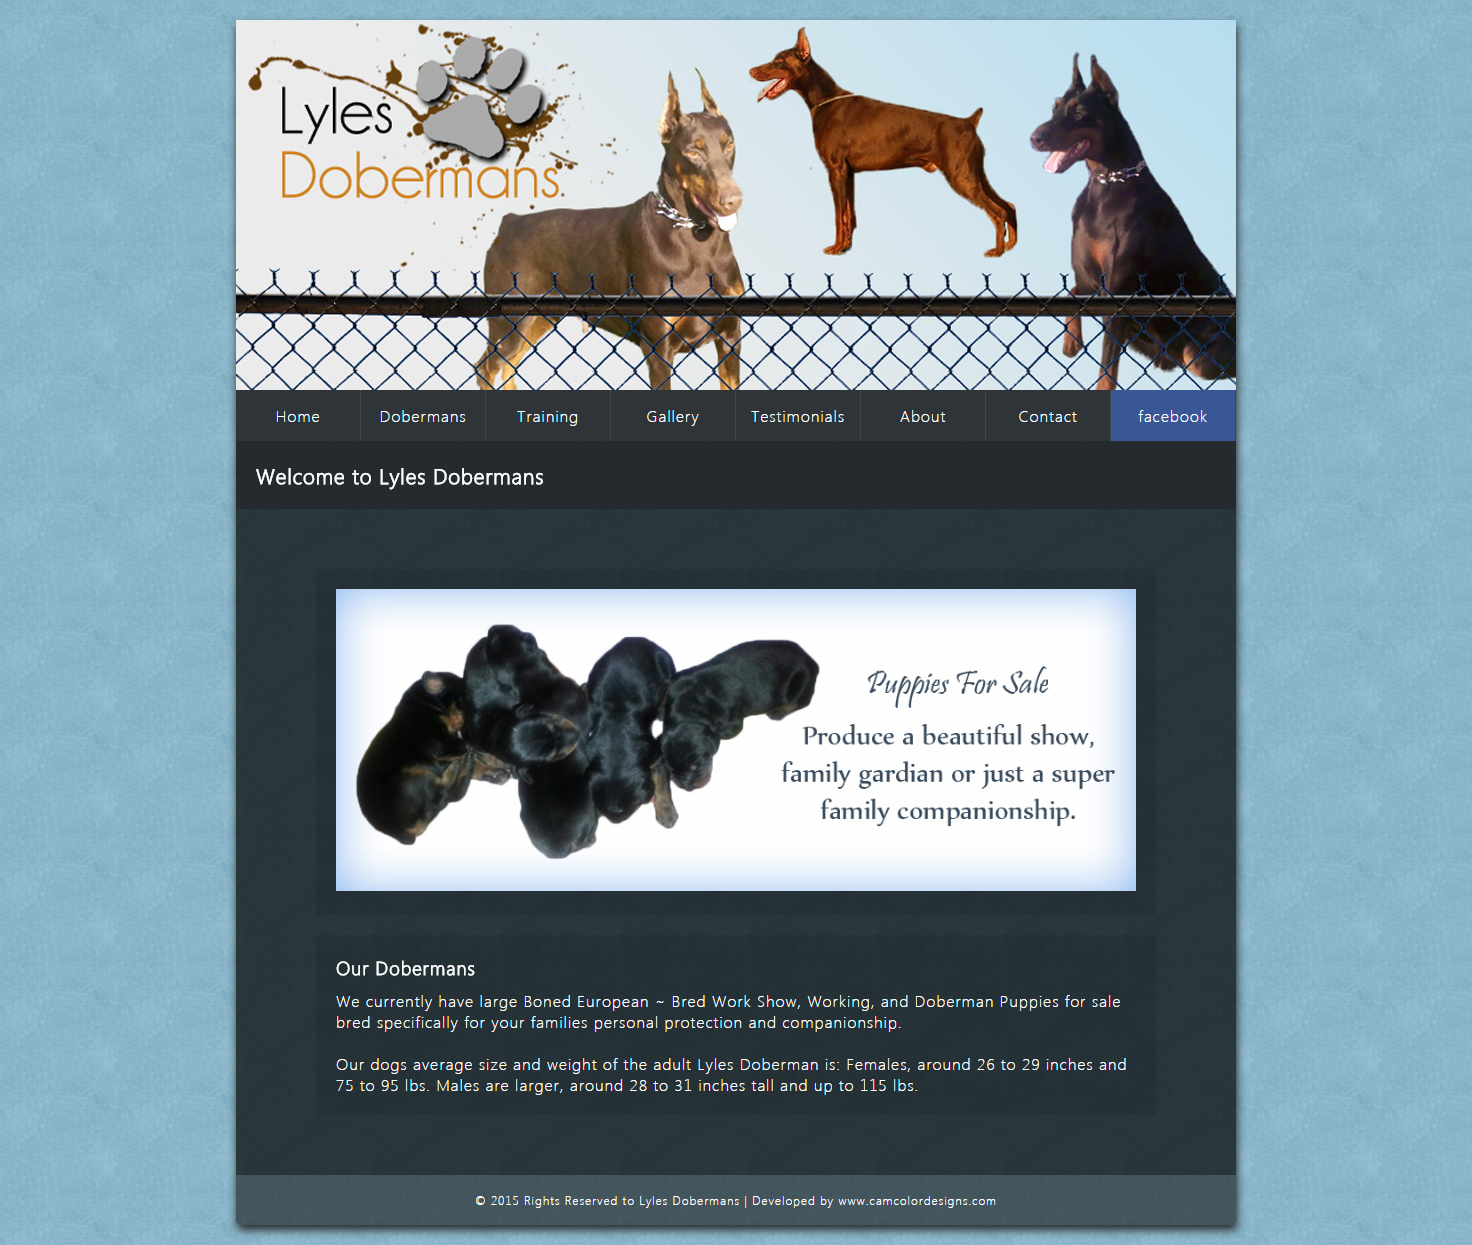 Image of TKerr home page